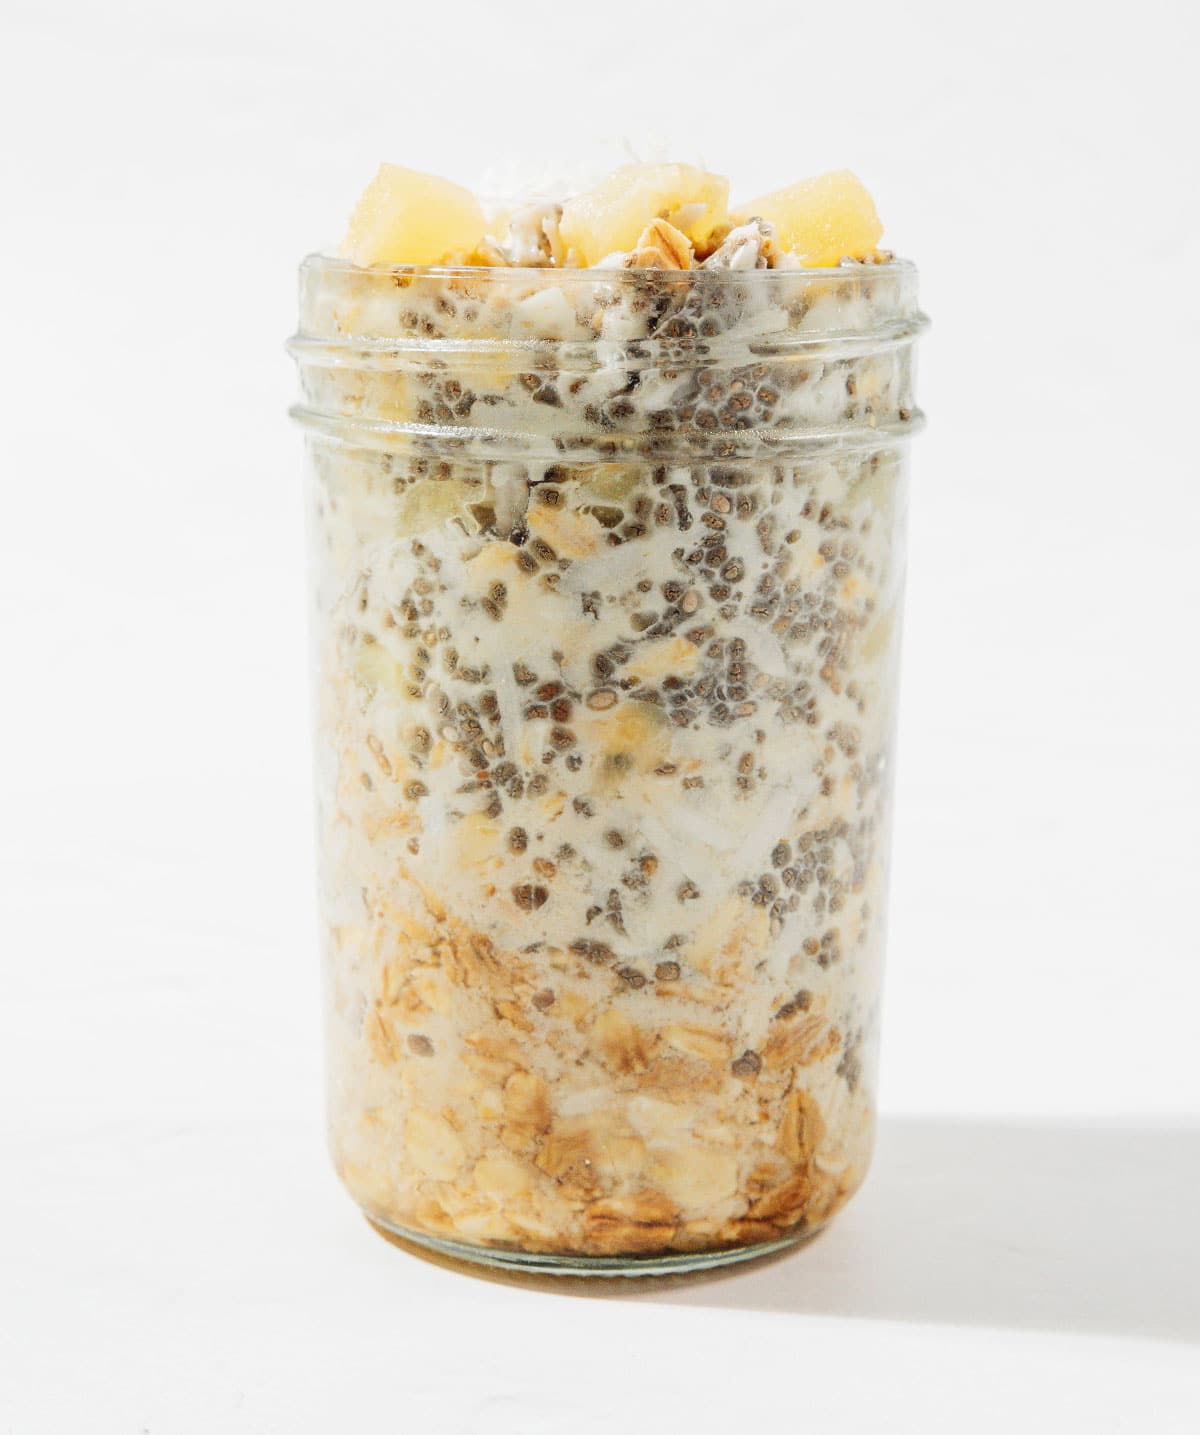 Ingredients for pineapple overnight oats in a jar.